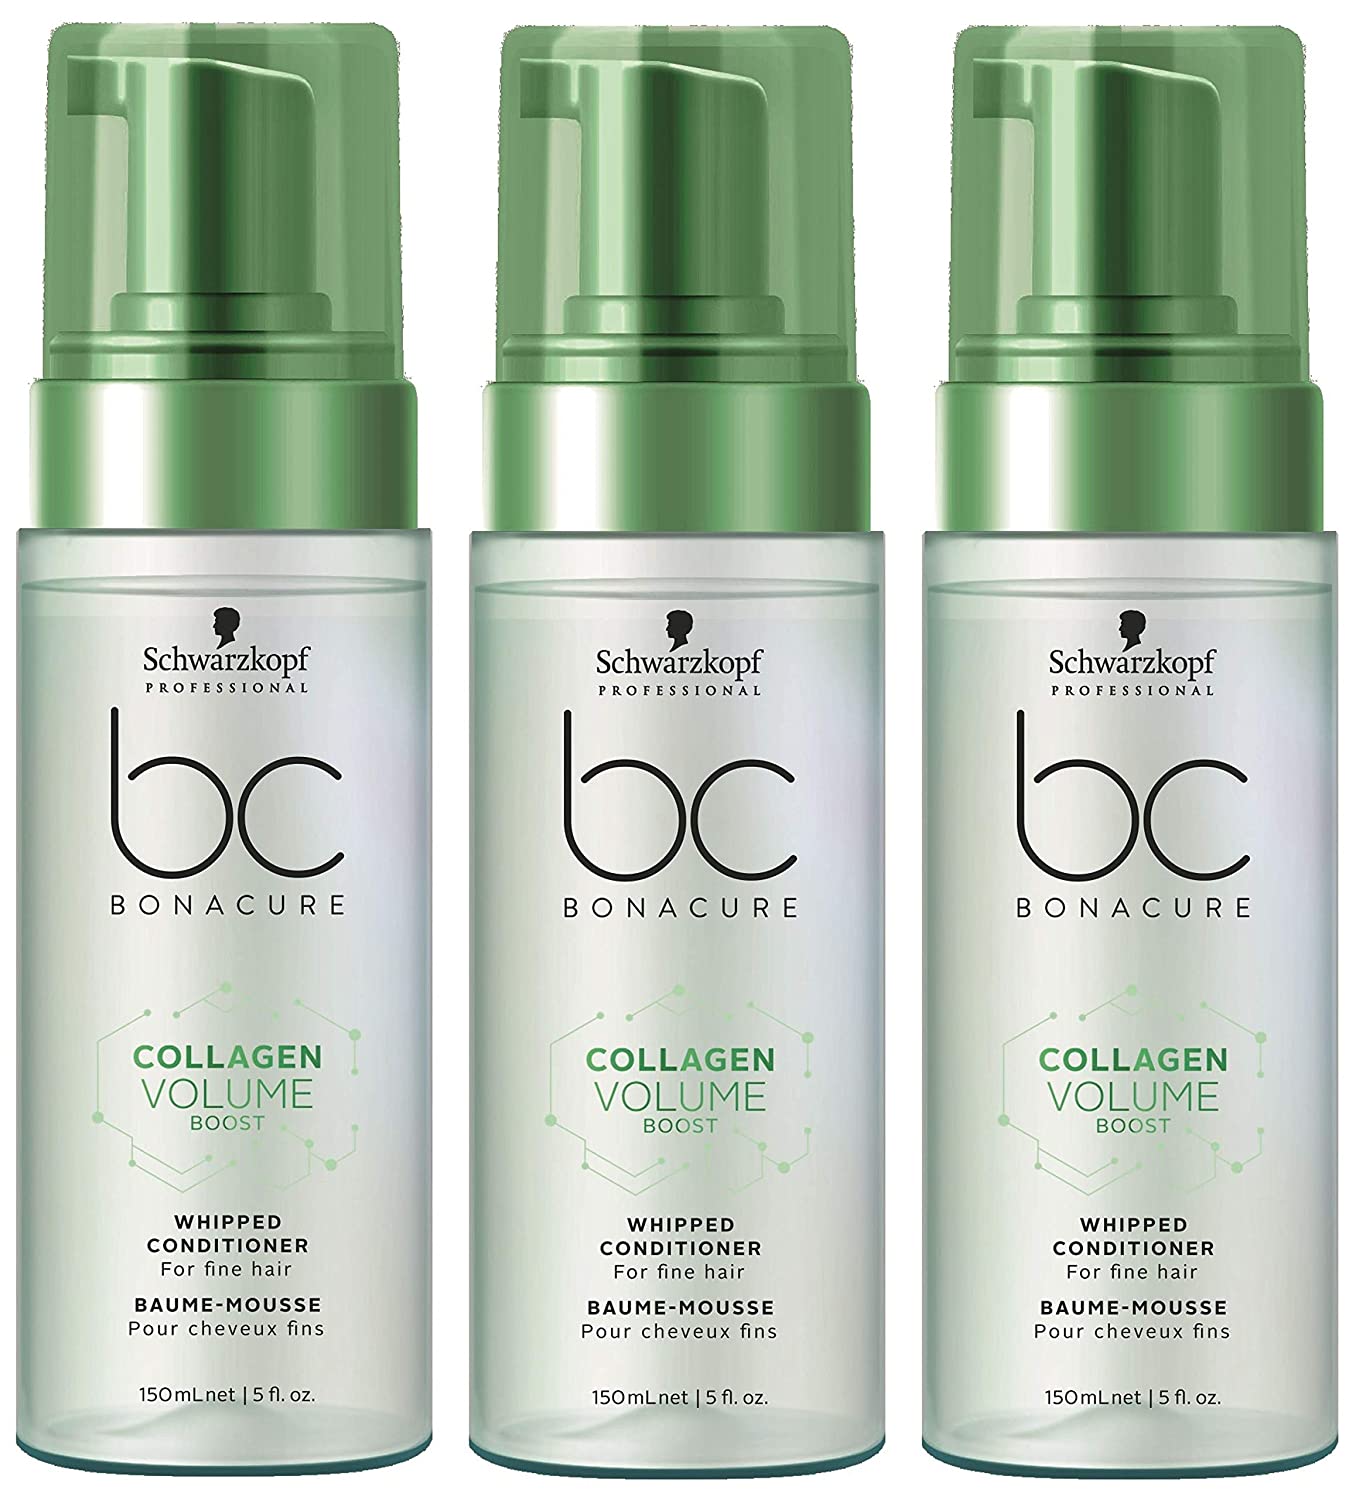 Bonacure Schwarzkopf Professional Collagen Volume Boost Whipped Conditioner 150 ml Pack of 3